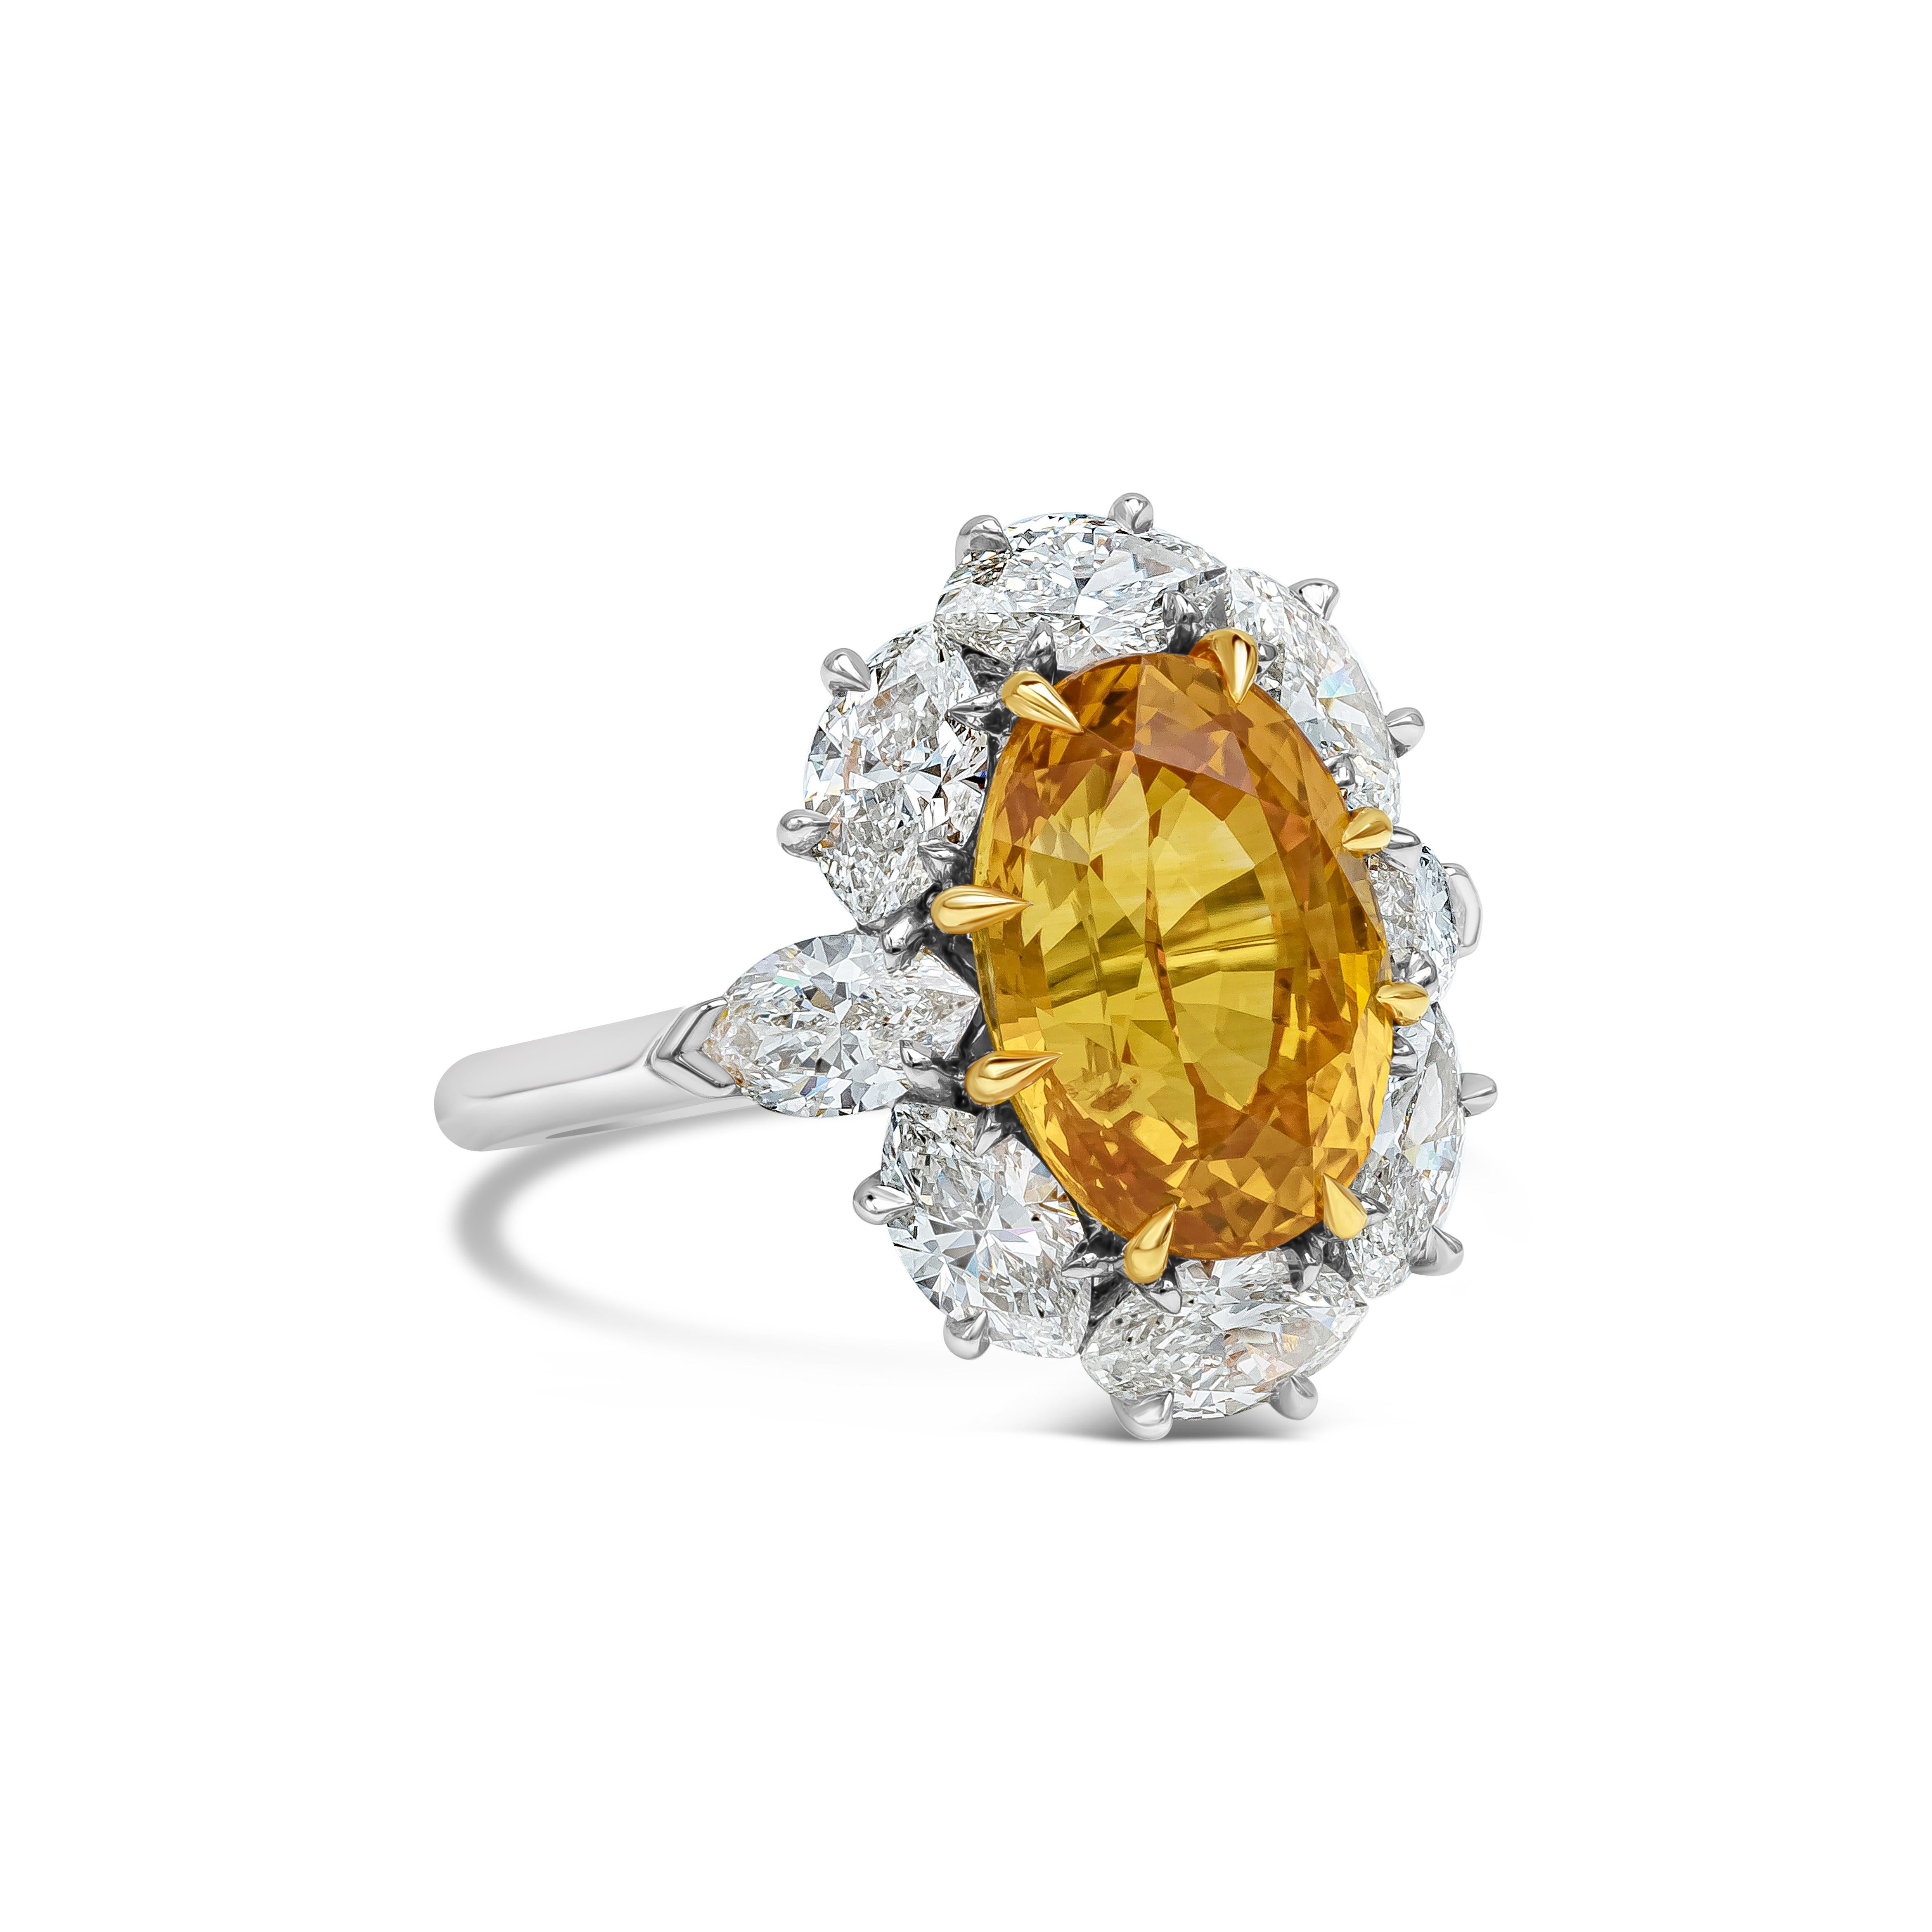 A color rich gemstone halo ring showcasing a GIA Certified oval cut orange sapphire weighing 6.64 carat total set in an eight prong 18K yellow gold setting. Surrounded by eight GIA certified marquise cut diamonds in a halo design weighing 2.42